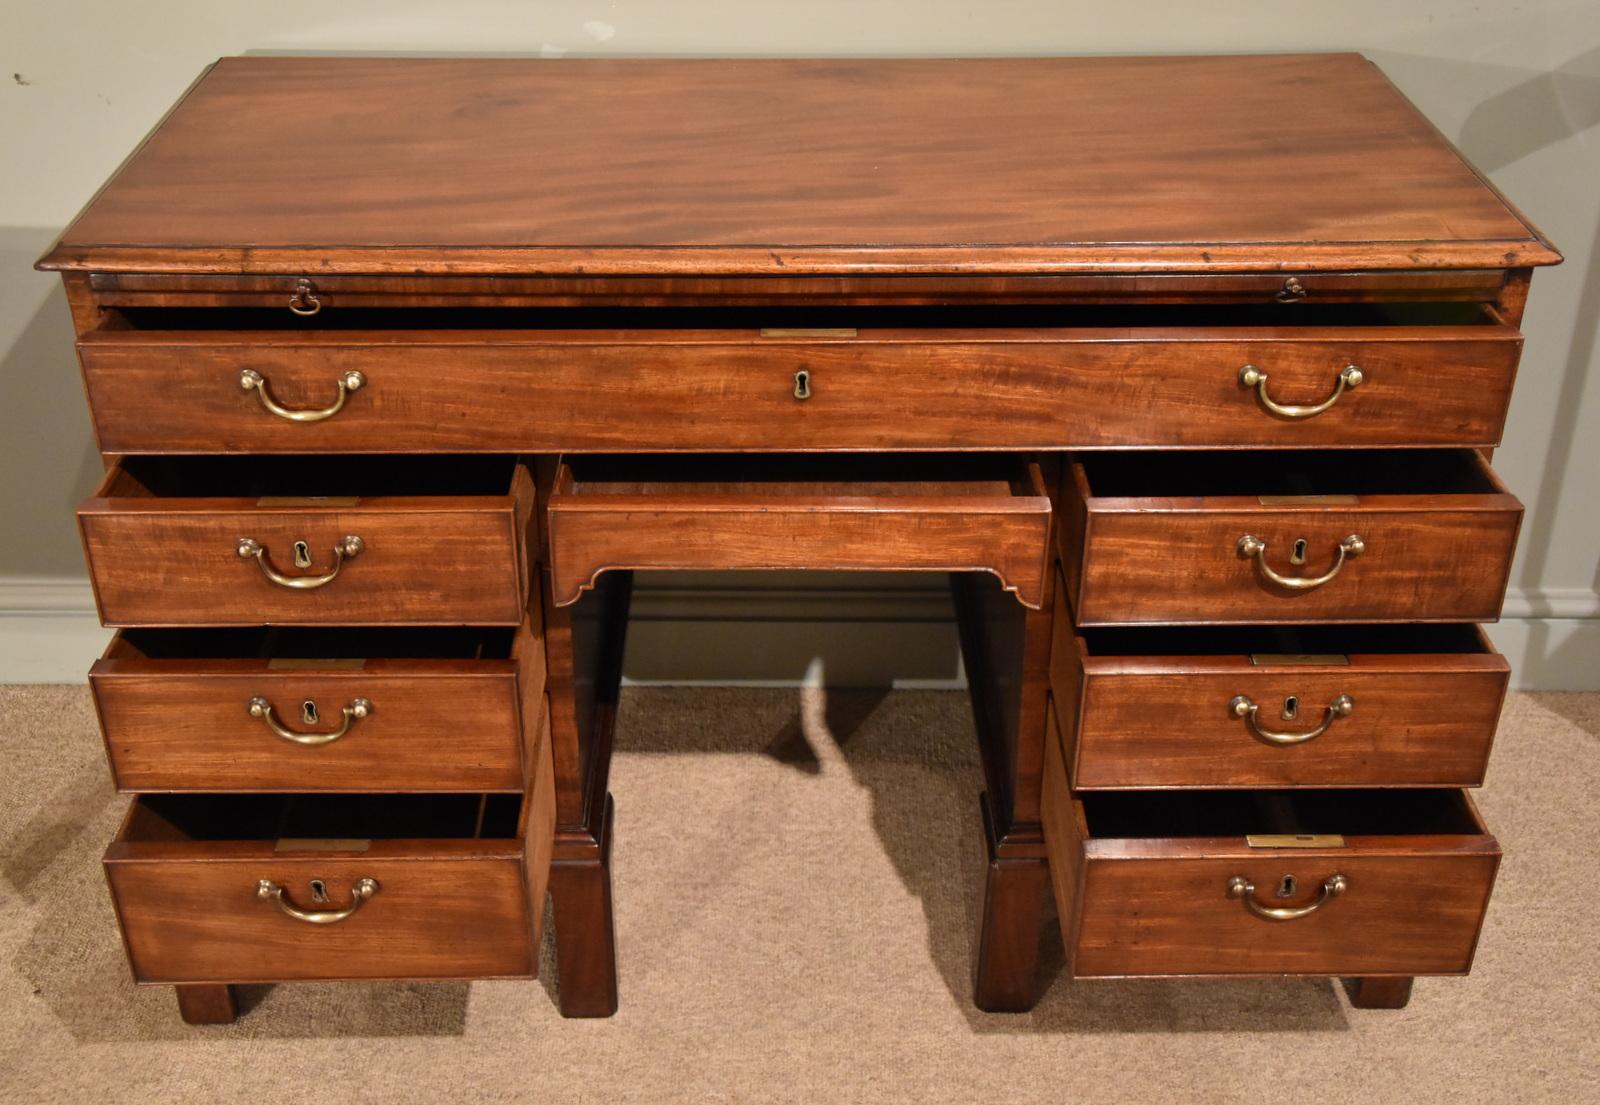 A fabulous George III mahogany kneehole desk with slide original handles and unusual Chinese Chippendale legs

Dimensions
Height 31.5